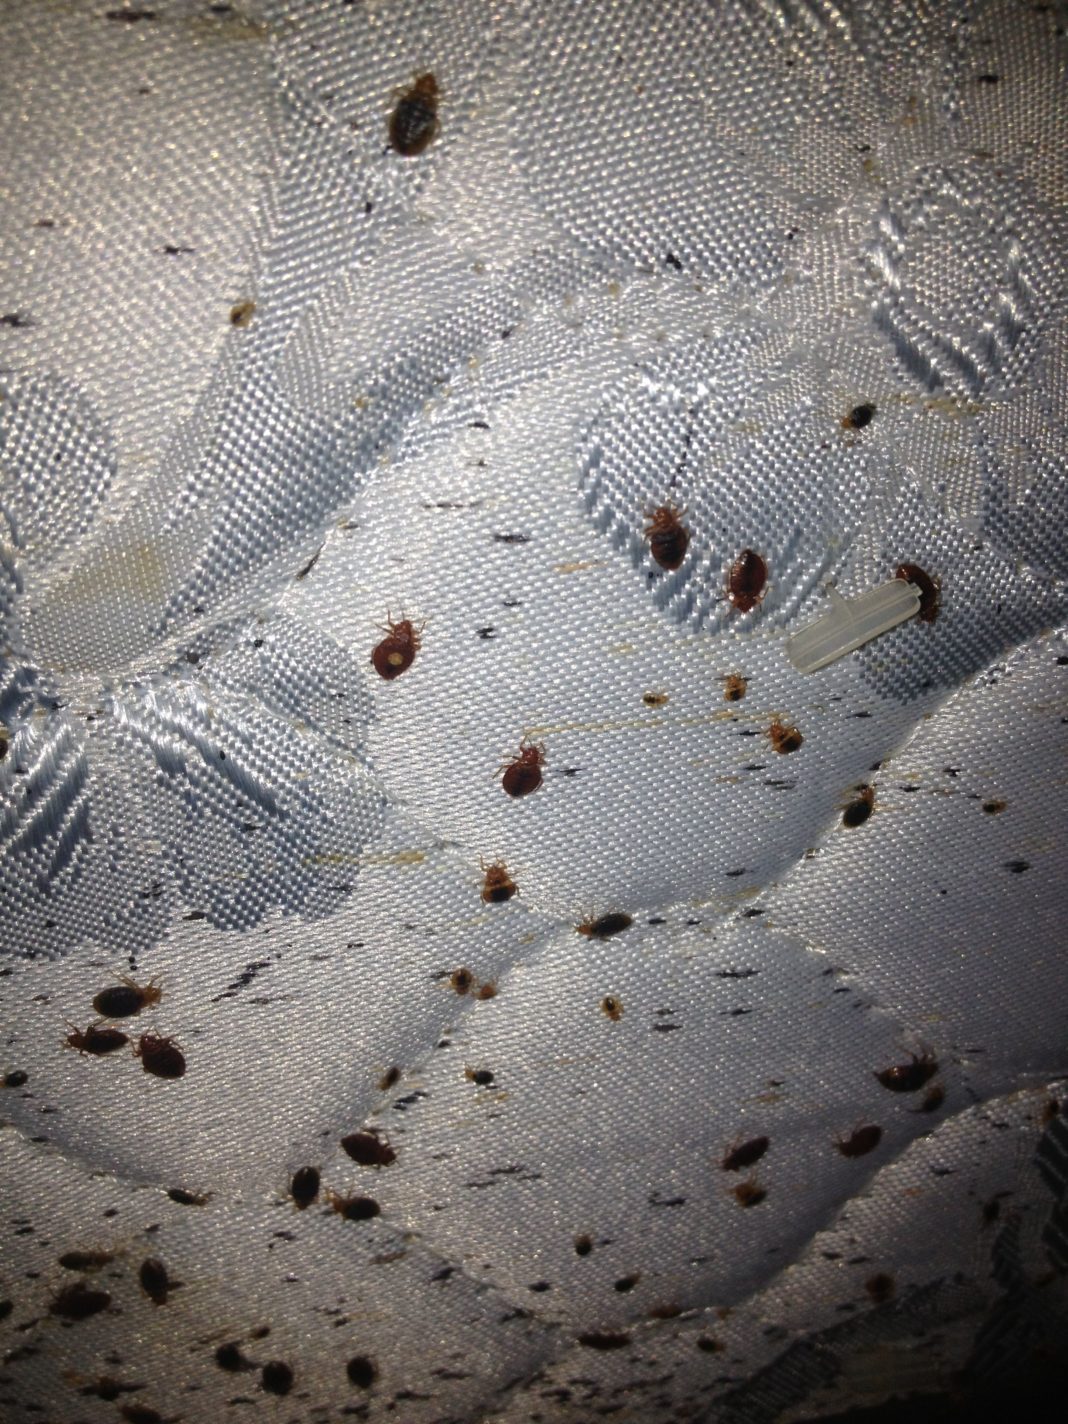 What Do Bed Bugs Look Like On A Mattress